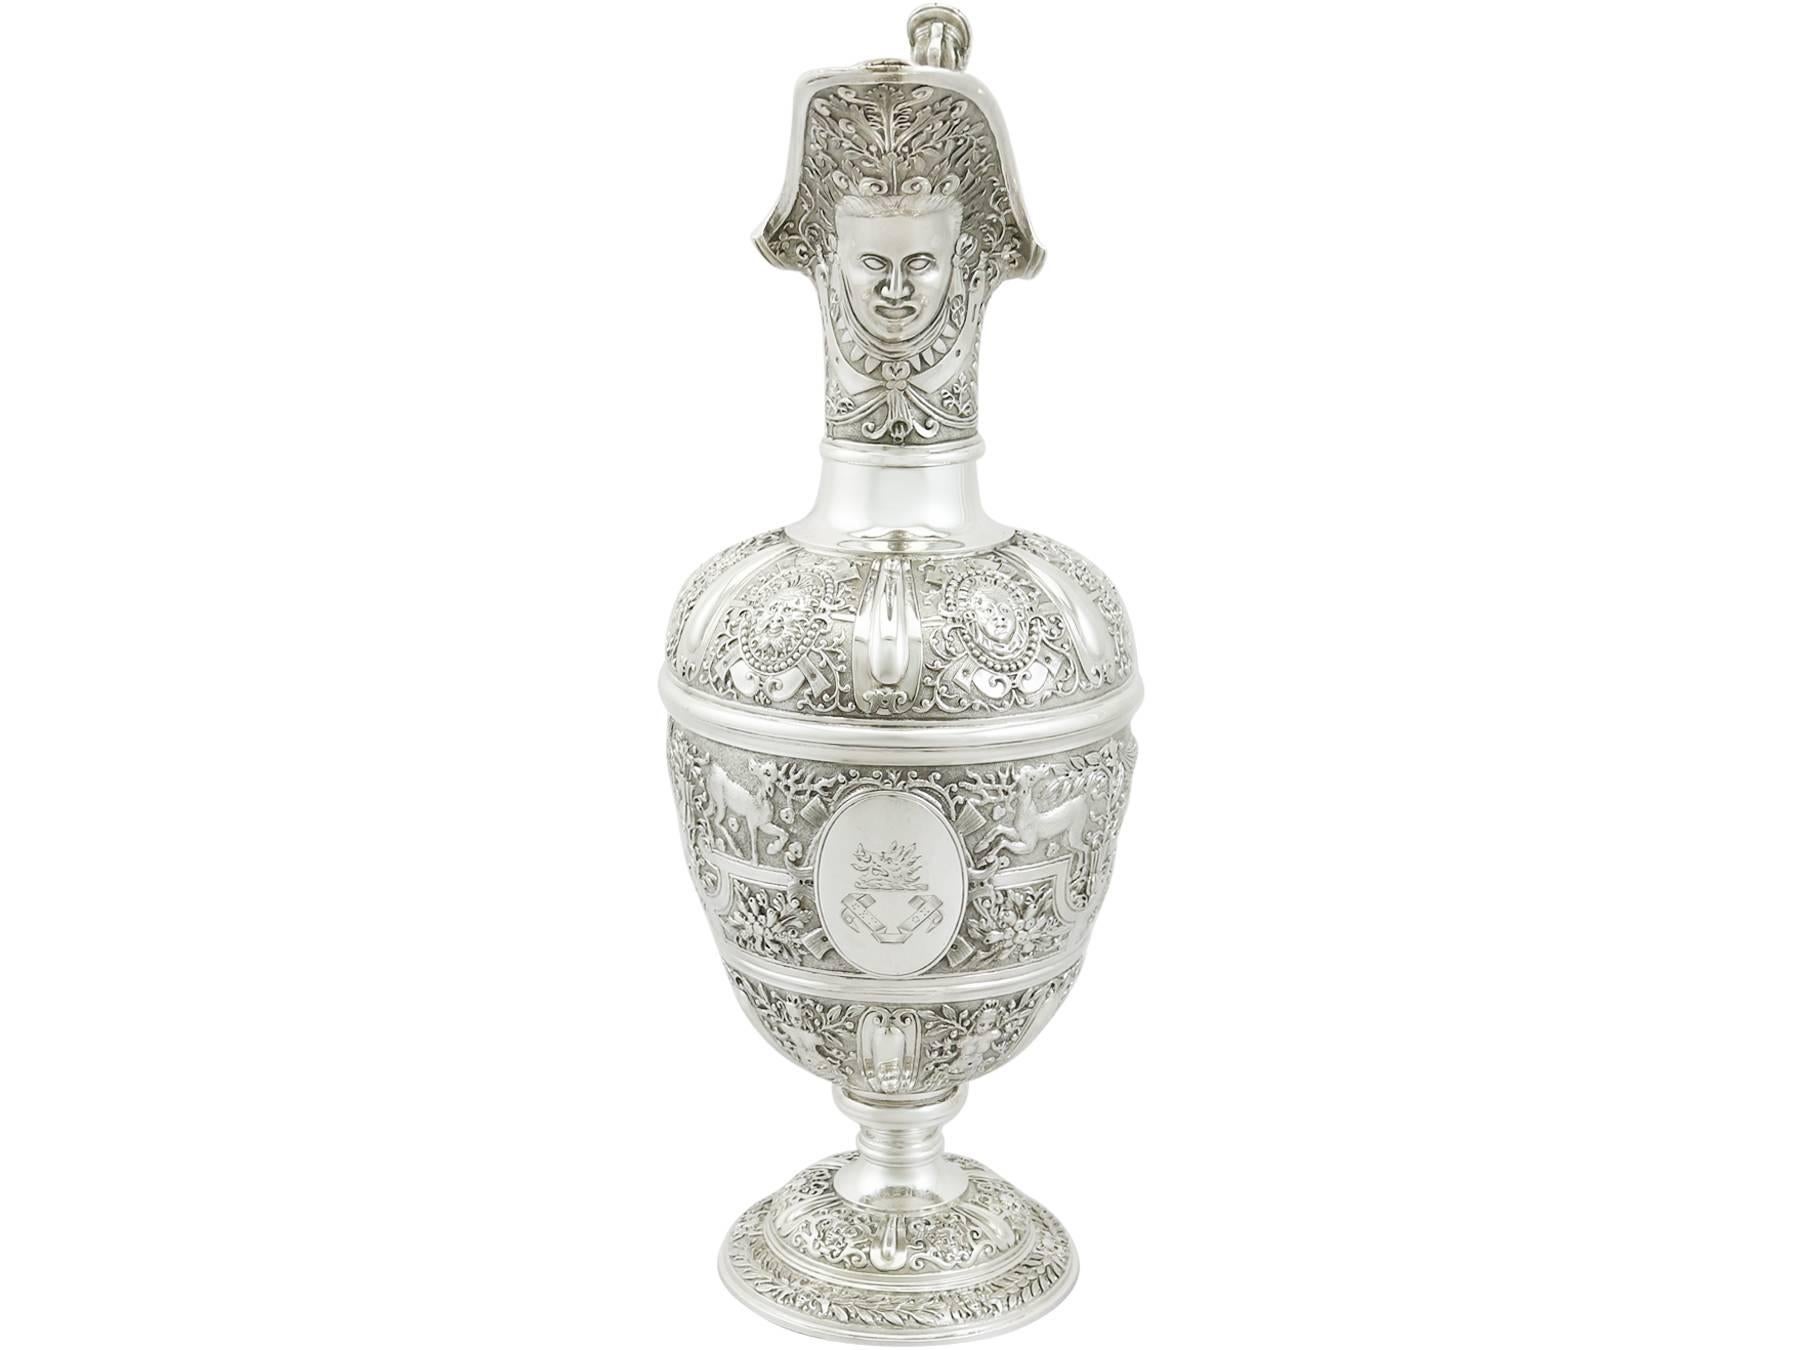 An exceptional, fine and impressive antique Victorian English sterling silver Cellini style claret jug made by Elkington & Co; an addition to our silver jug collection

This exceptional antique Victorian English sterling silver Cellini style